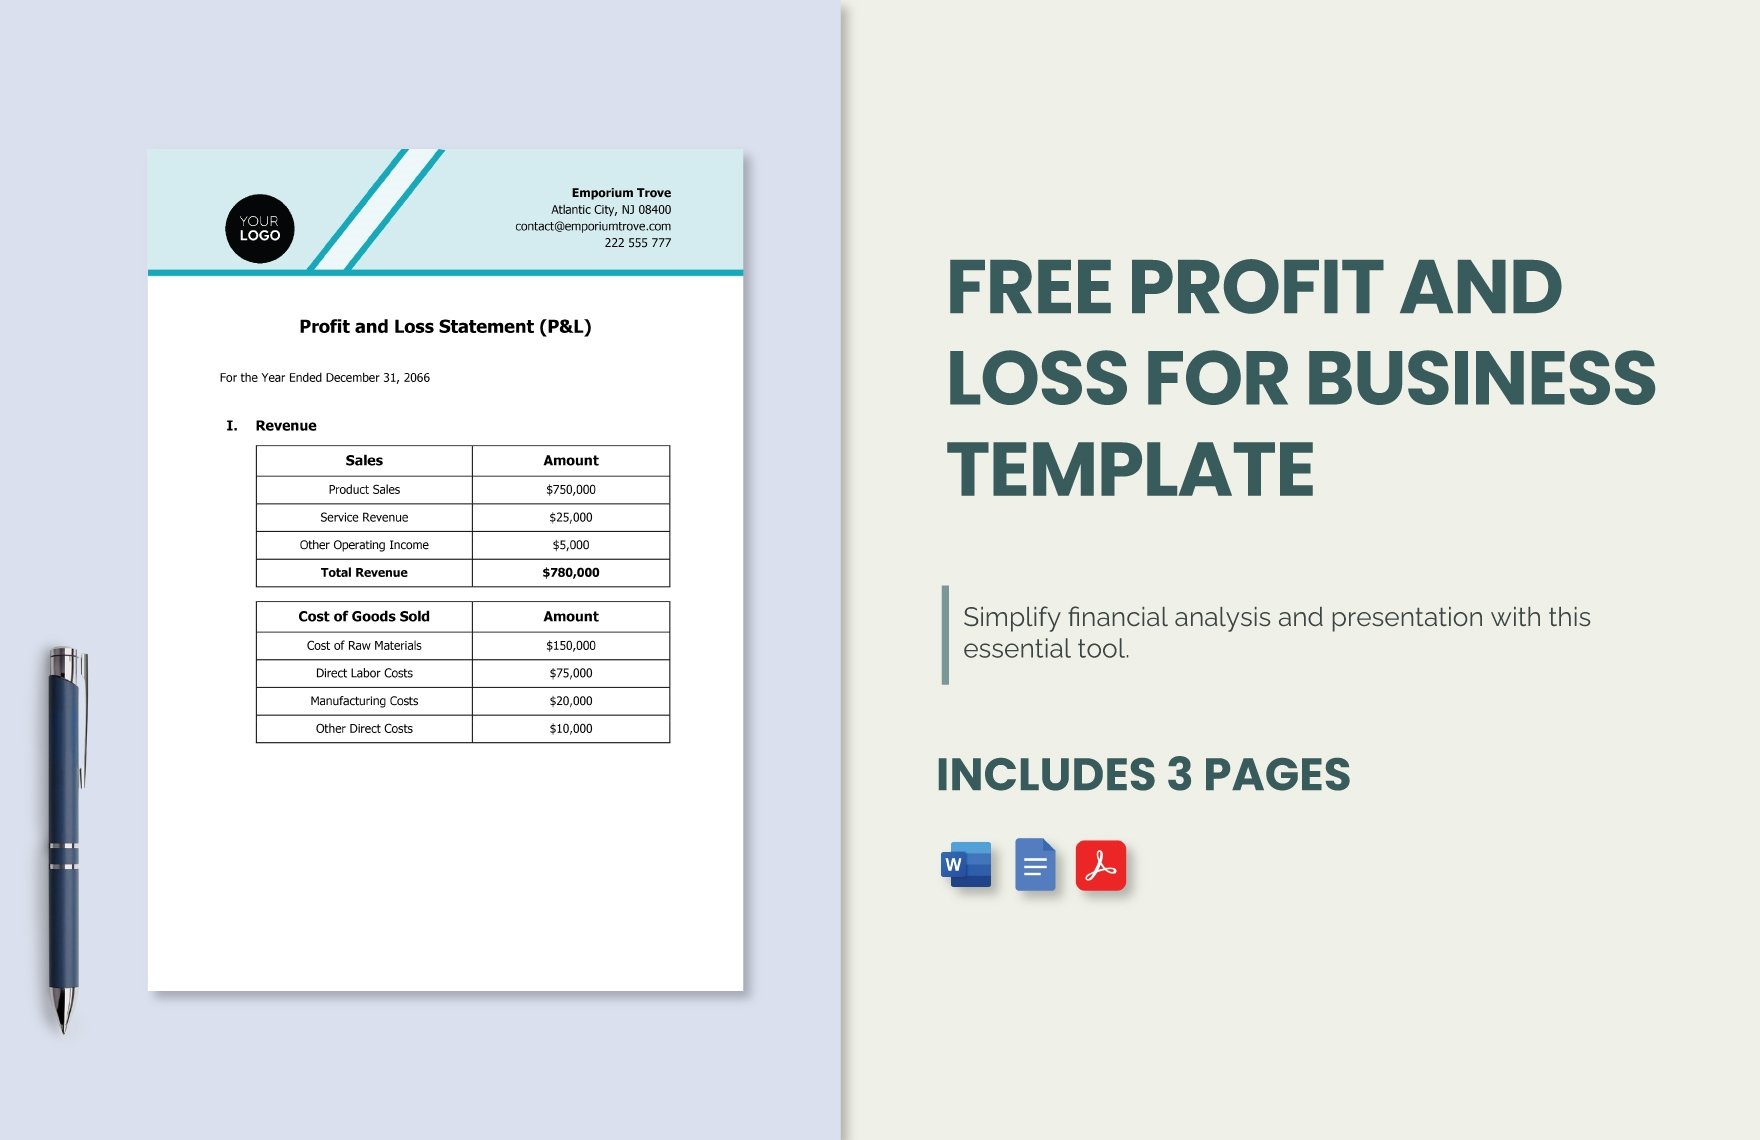 Profit and Loss for Business Template